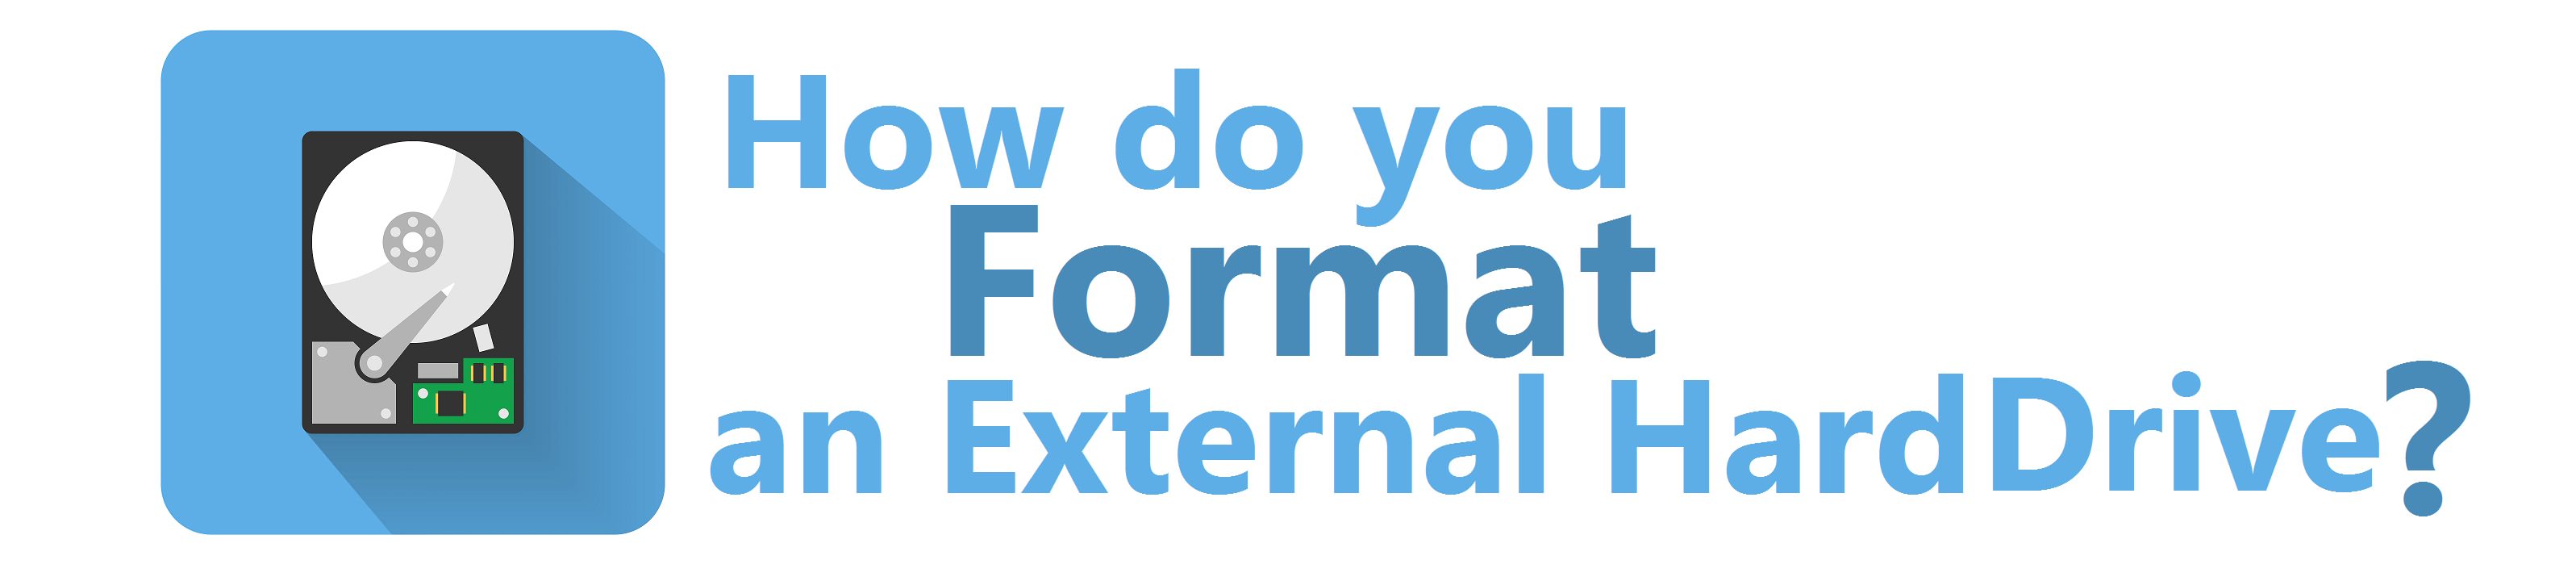 format exteral hard drive title